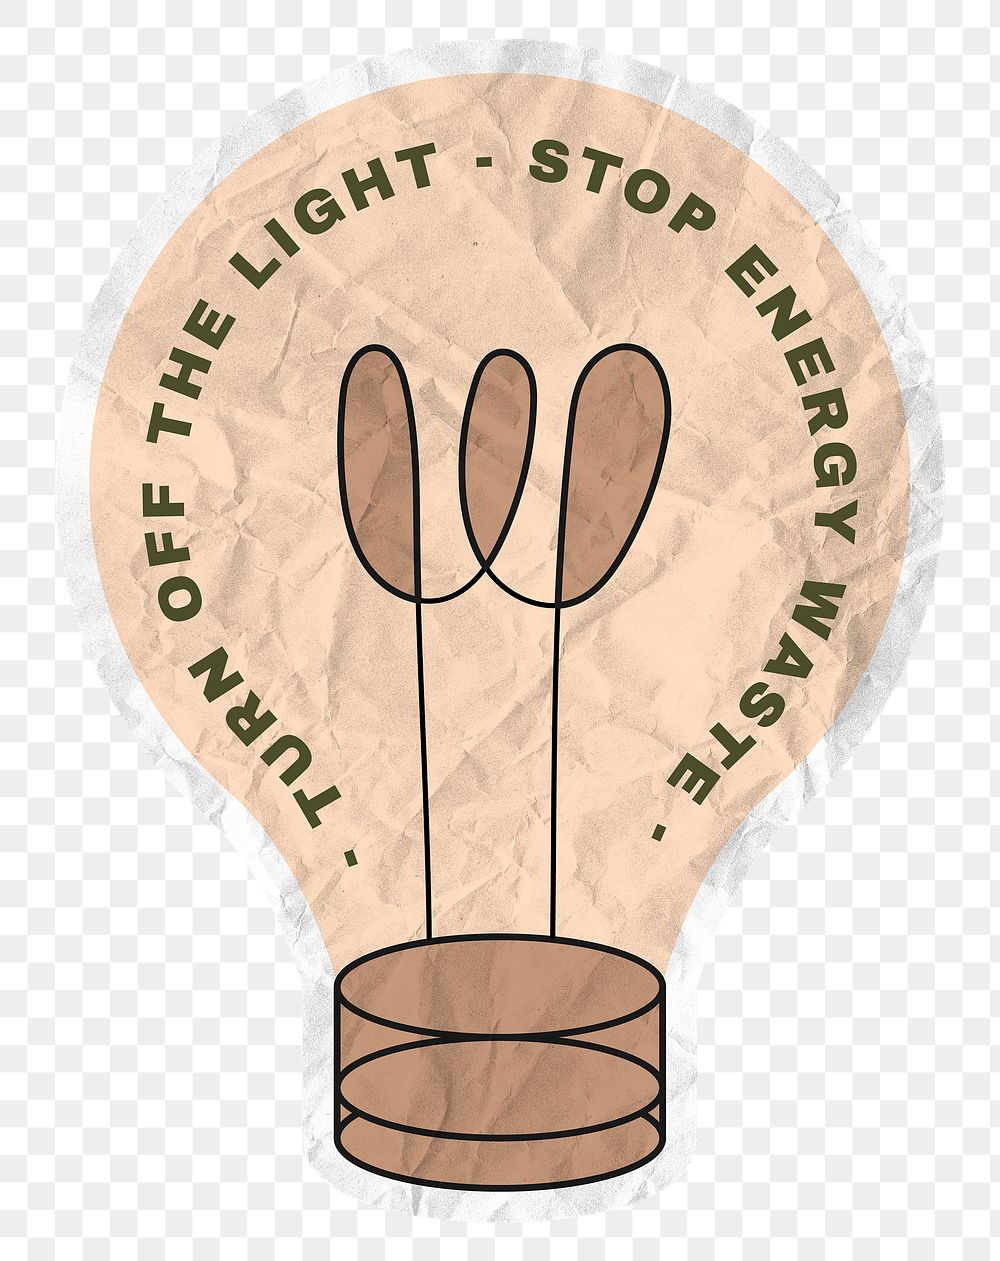 Png sticker save energy with light bulb illustration in crumpled paper texture, turn off the light stop energy waste text